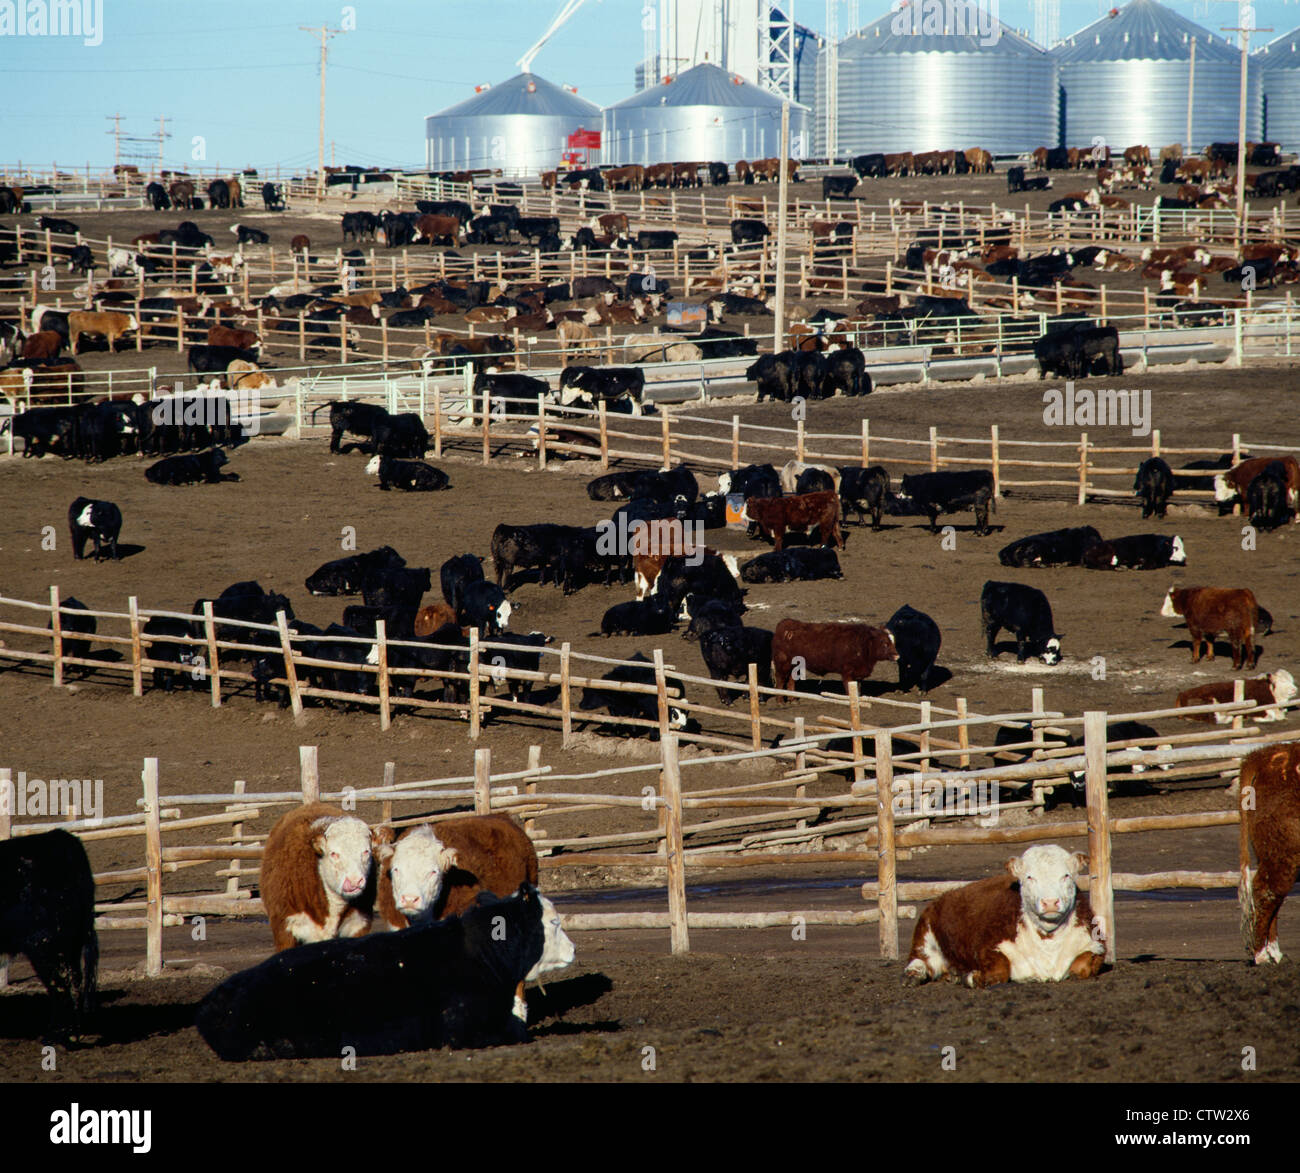 COMMERCIAL FEEDLOT WITH 900 - 1000 LB STEERS / KANSAS Stock Photo